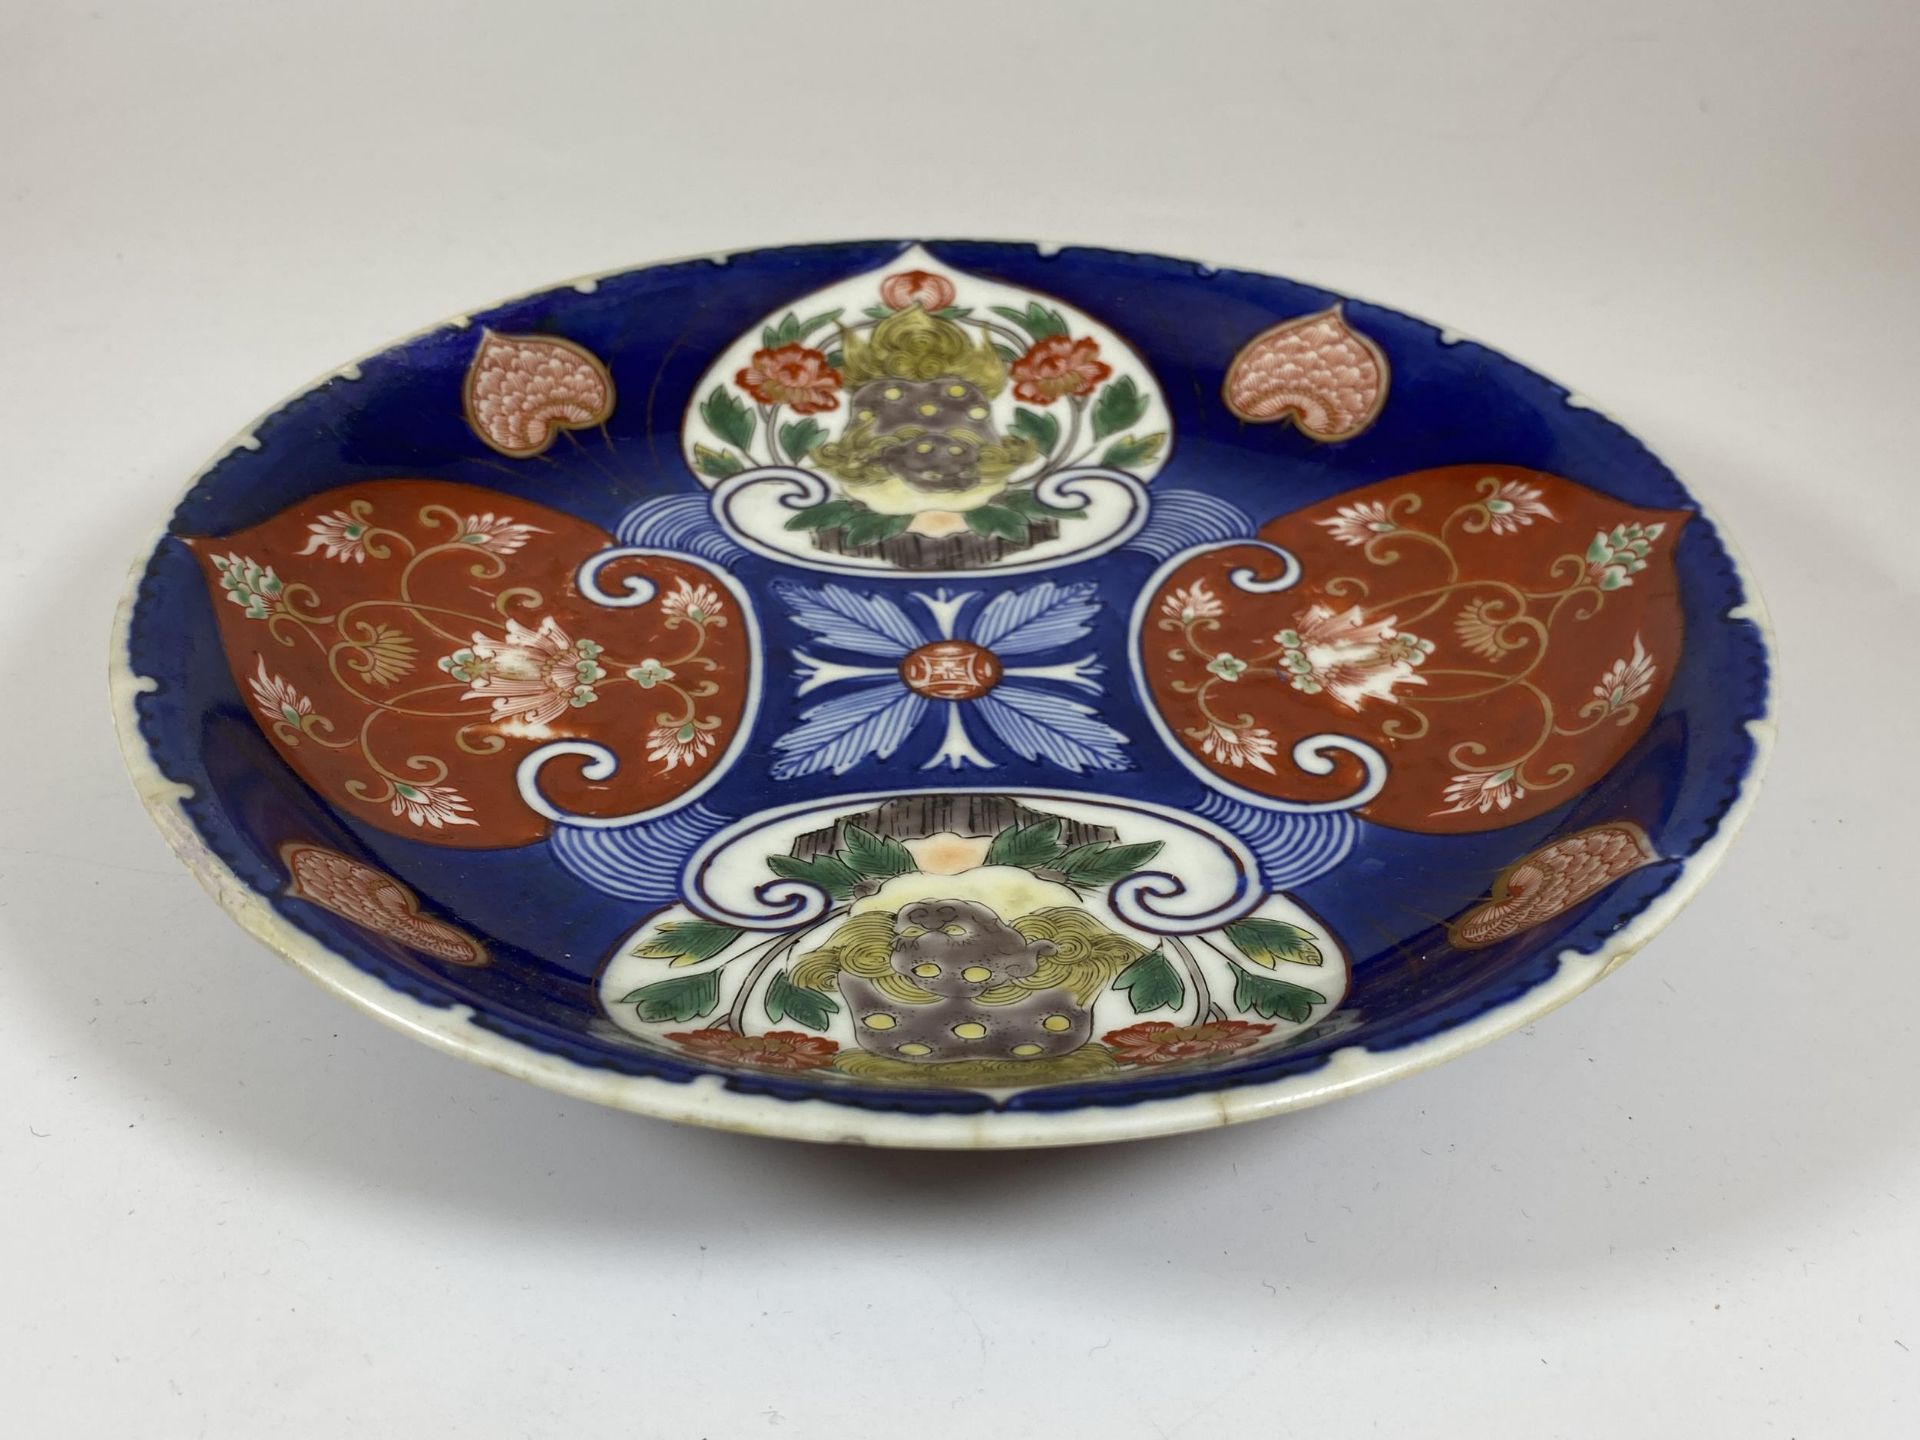 A JAPANESE MEIJI PERIOD (1868-1912) IMARI ON BLUE GROUND FLORAL PATTERN DISH, SIX CHARACTER MARK - Image 3 of 5